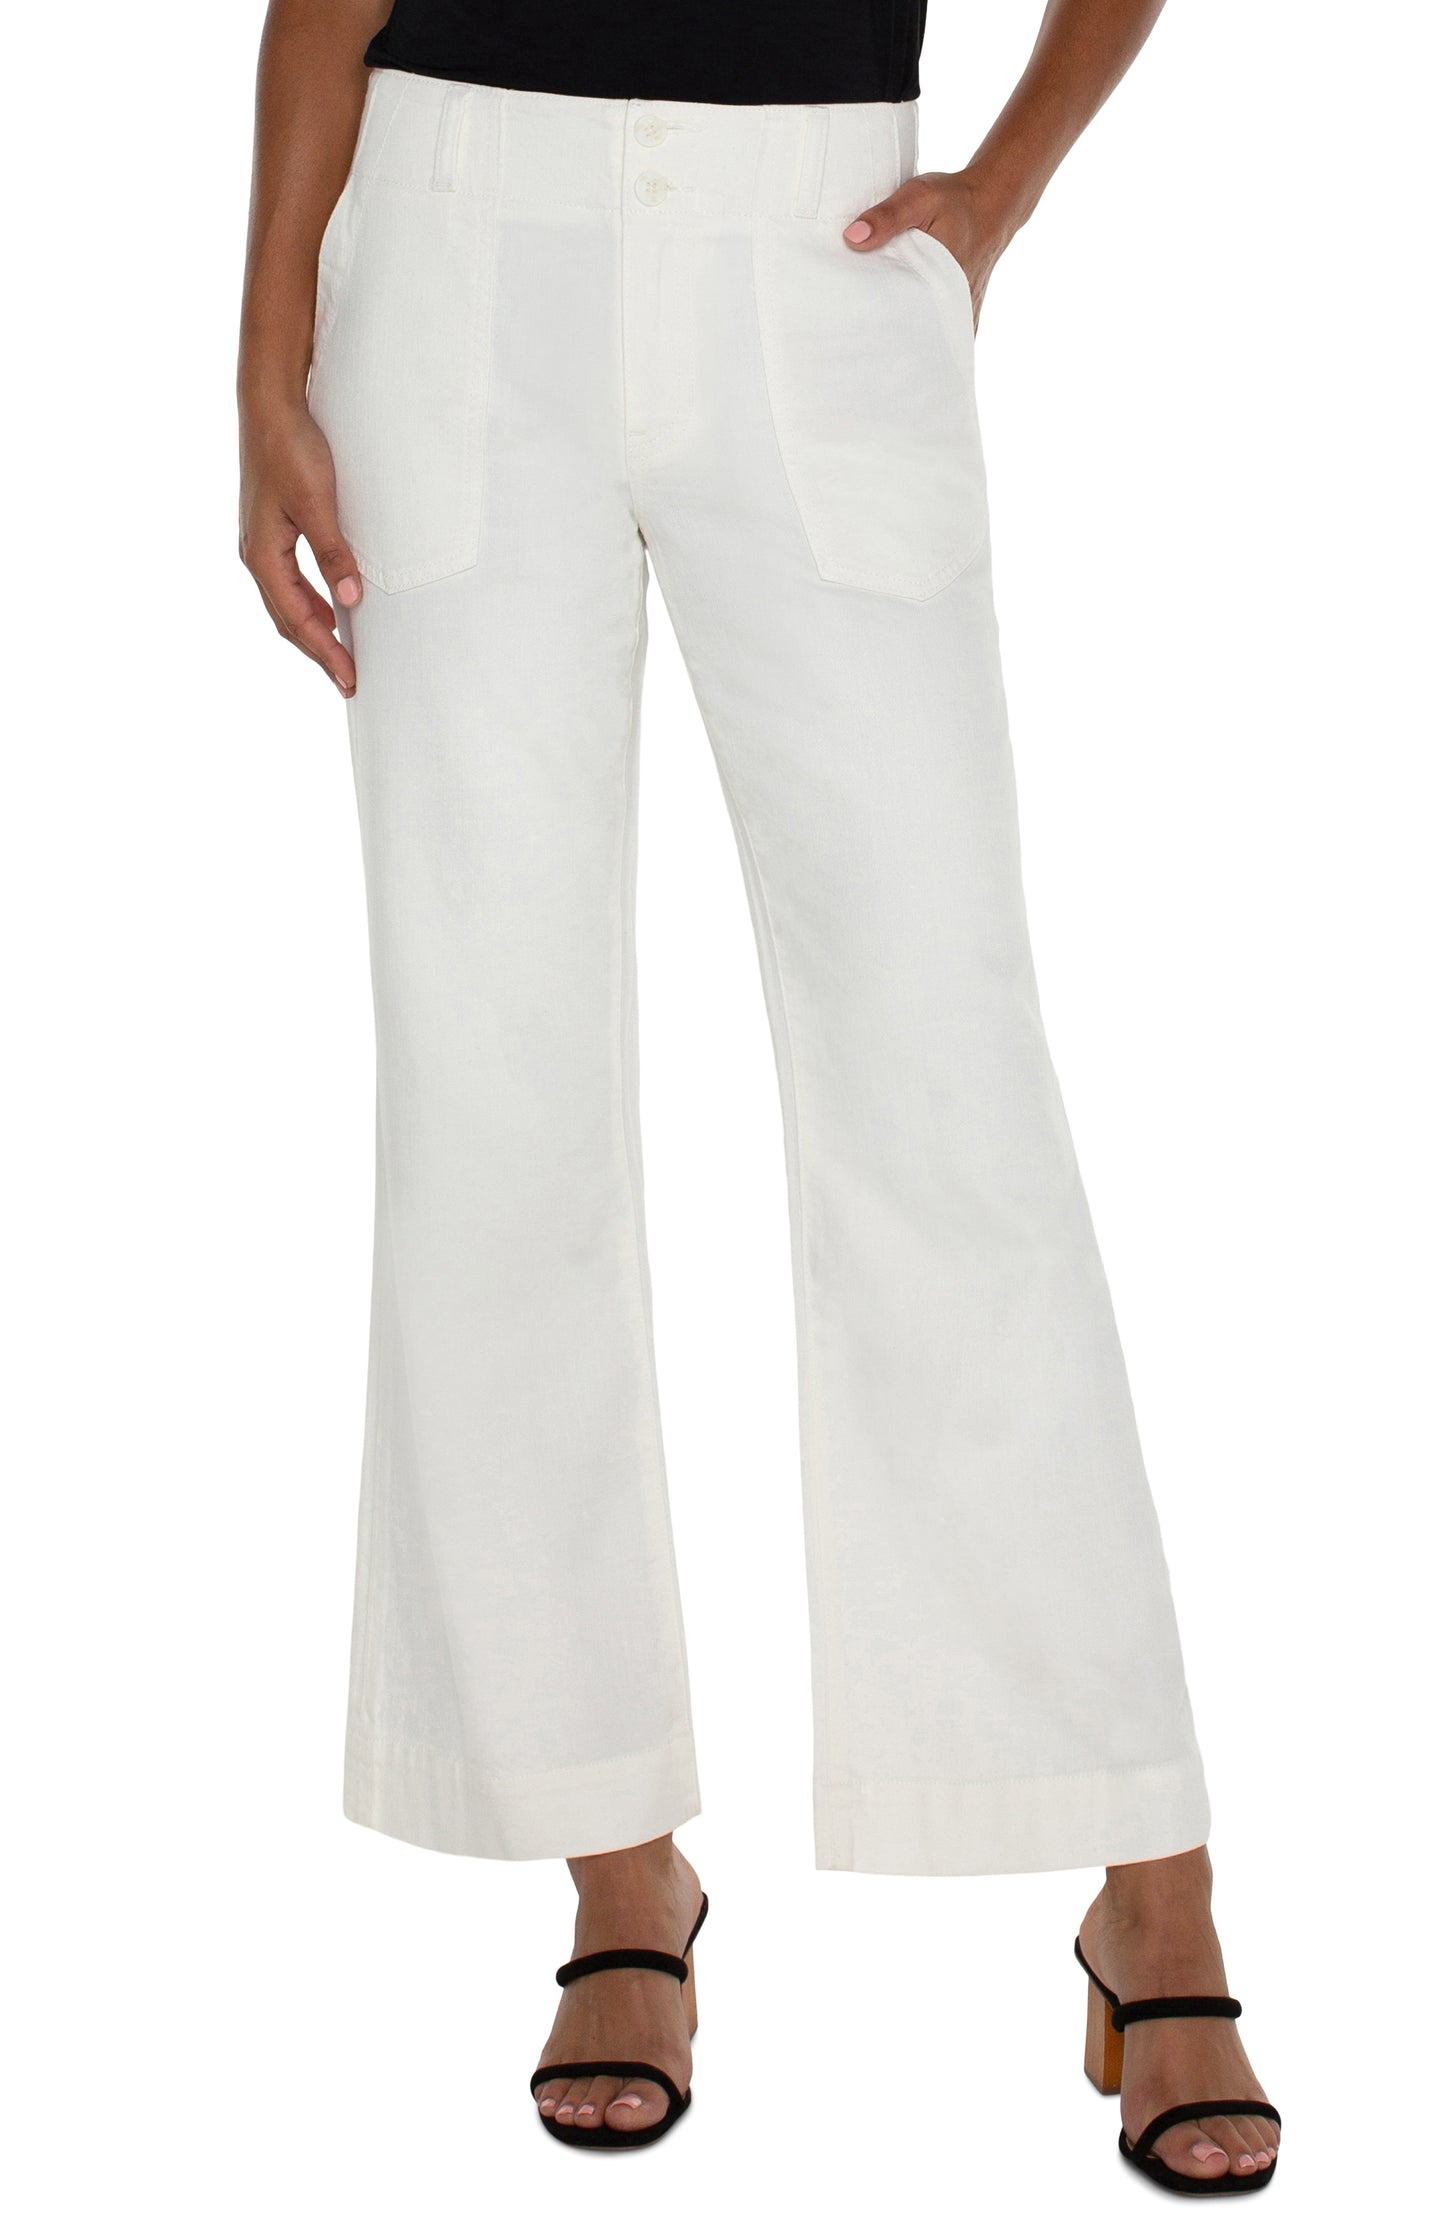 Hannah Flare Jeans with Utility Details - Soft White